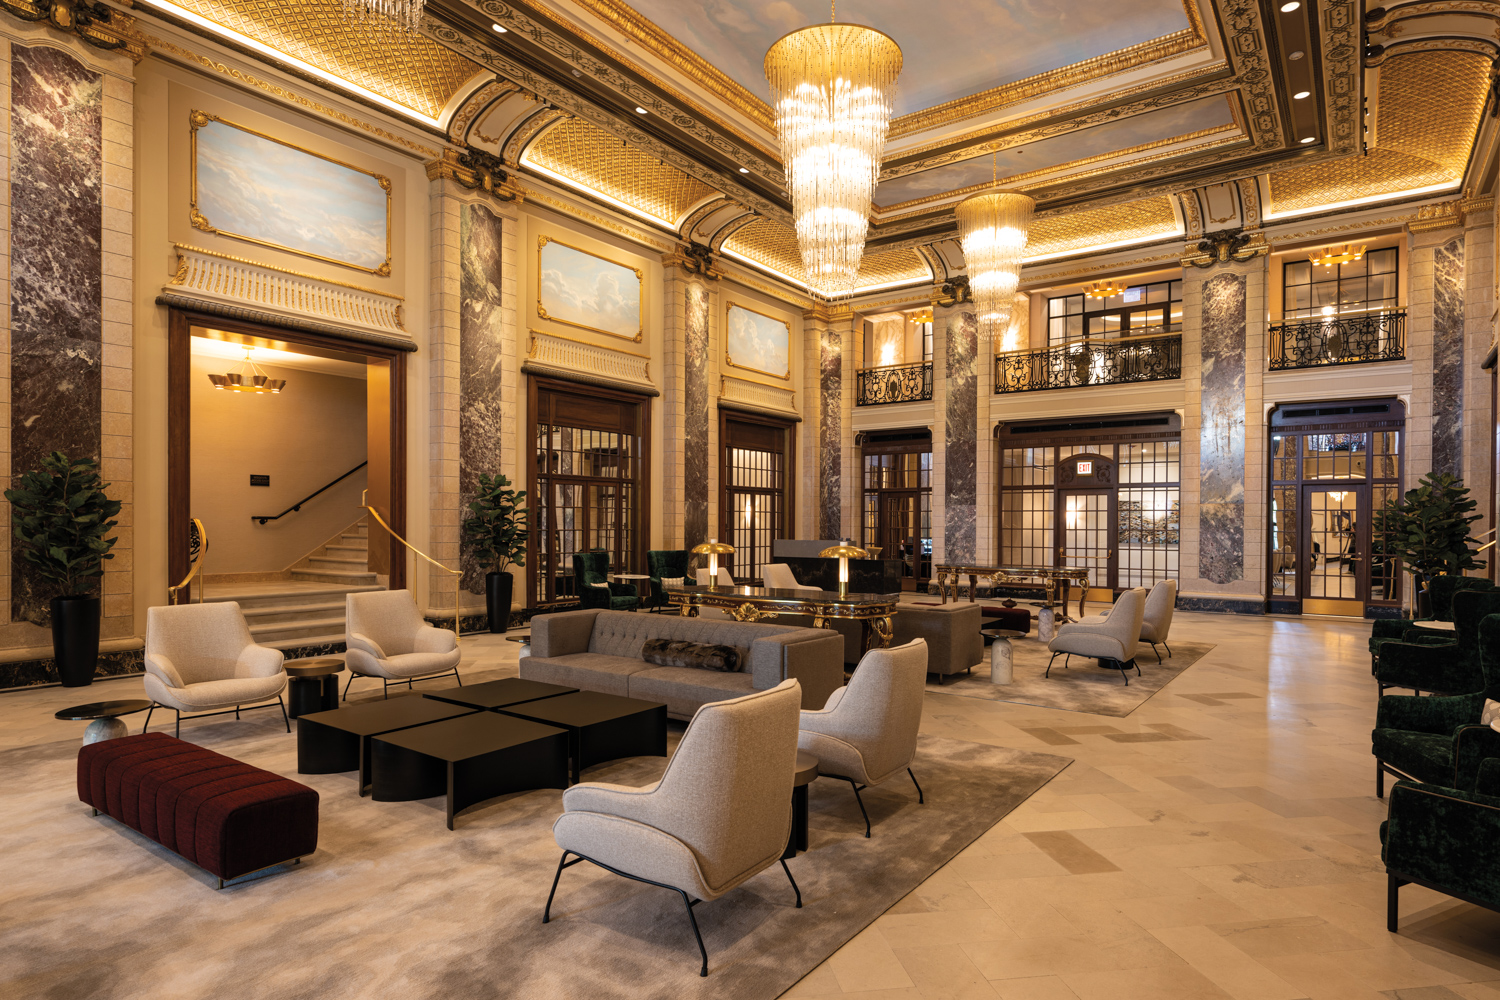 Apartment building lobby with elaborate gold moldings and dramatic chandeliers